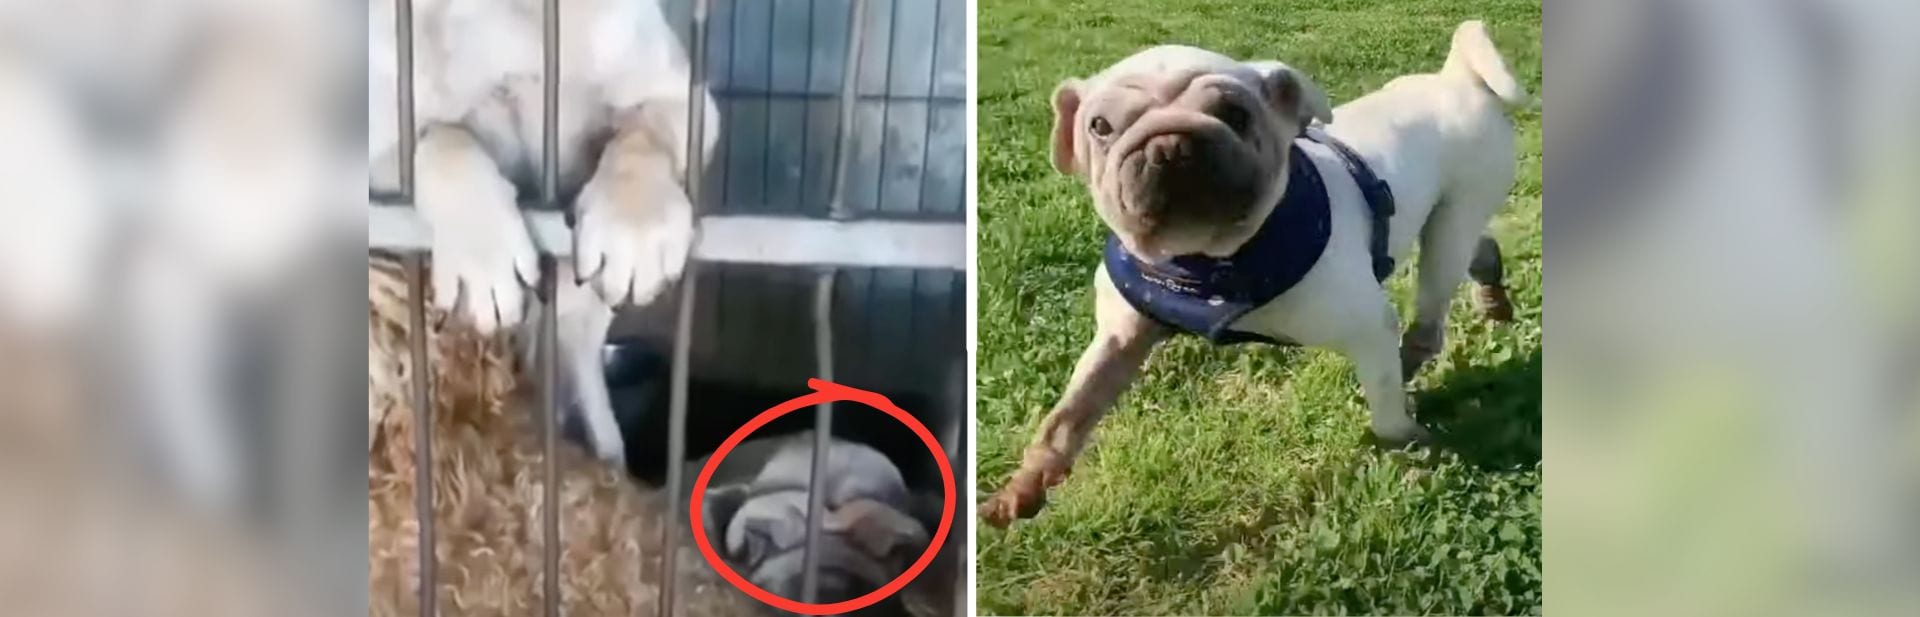 Dog Once Doomed For Tragedy Now Spends His Days Lounging As A Viral Sensation